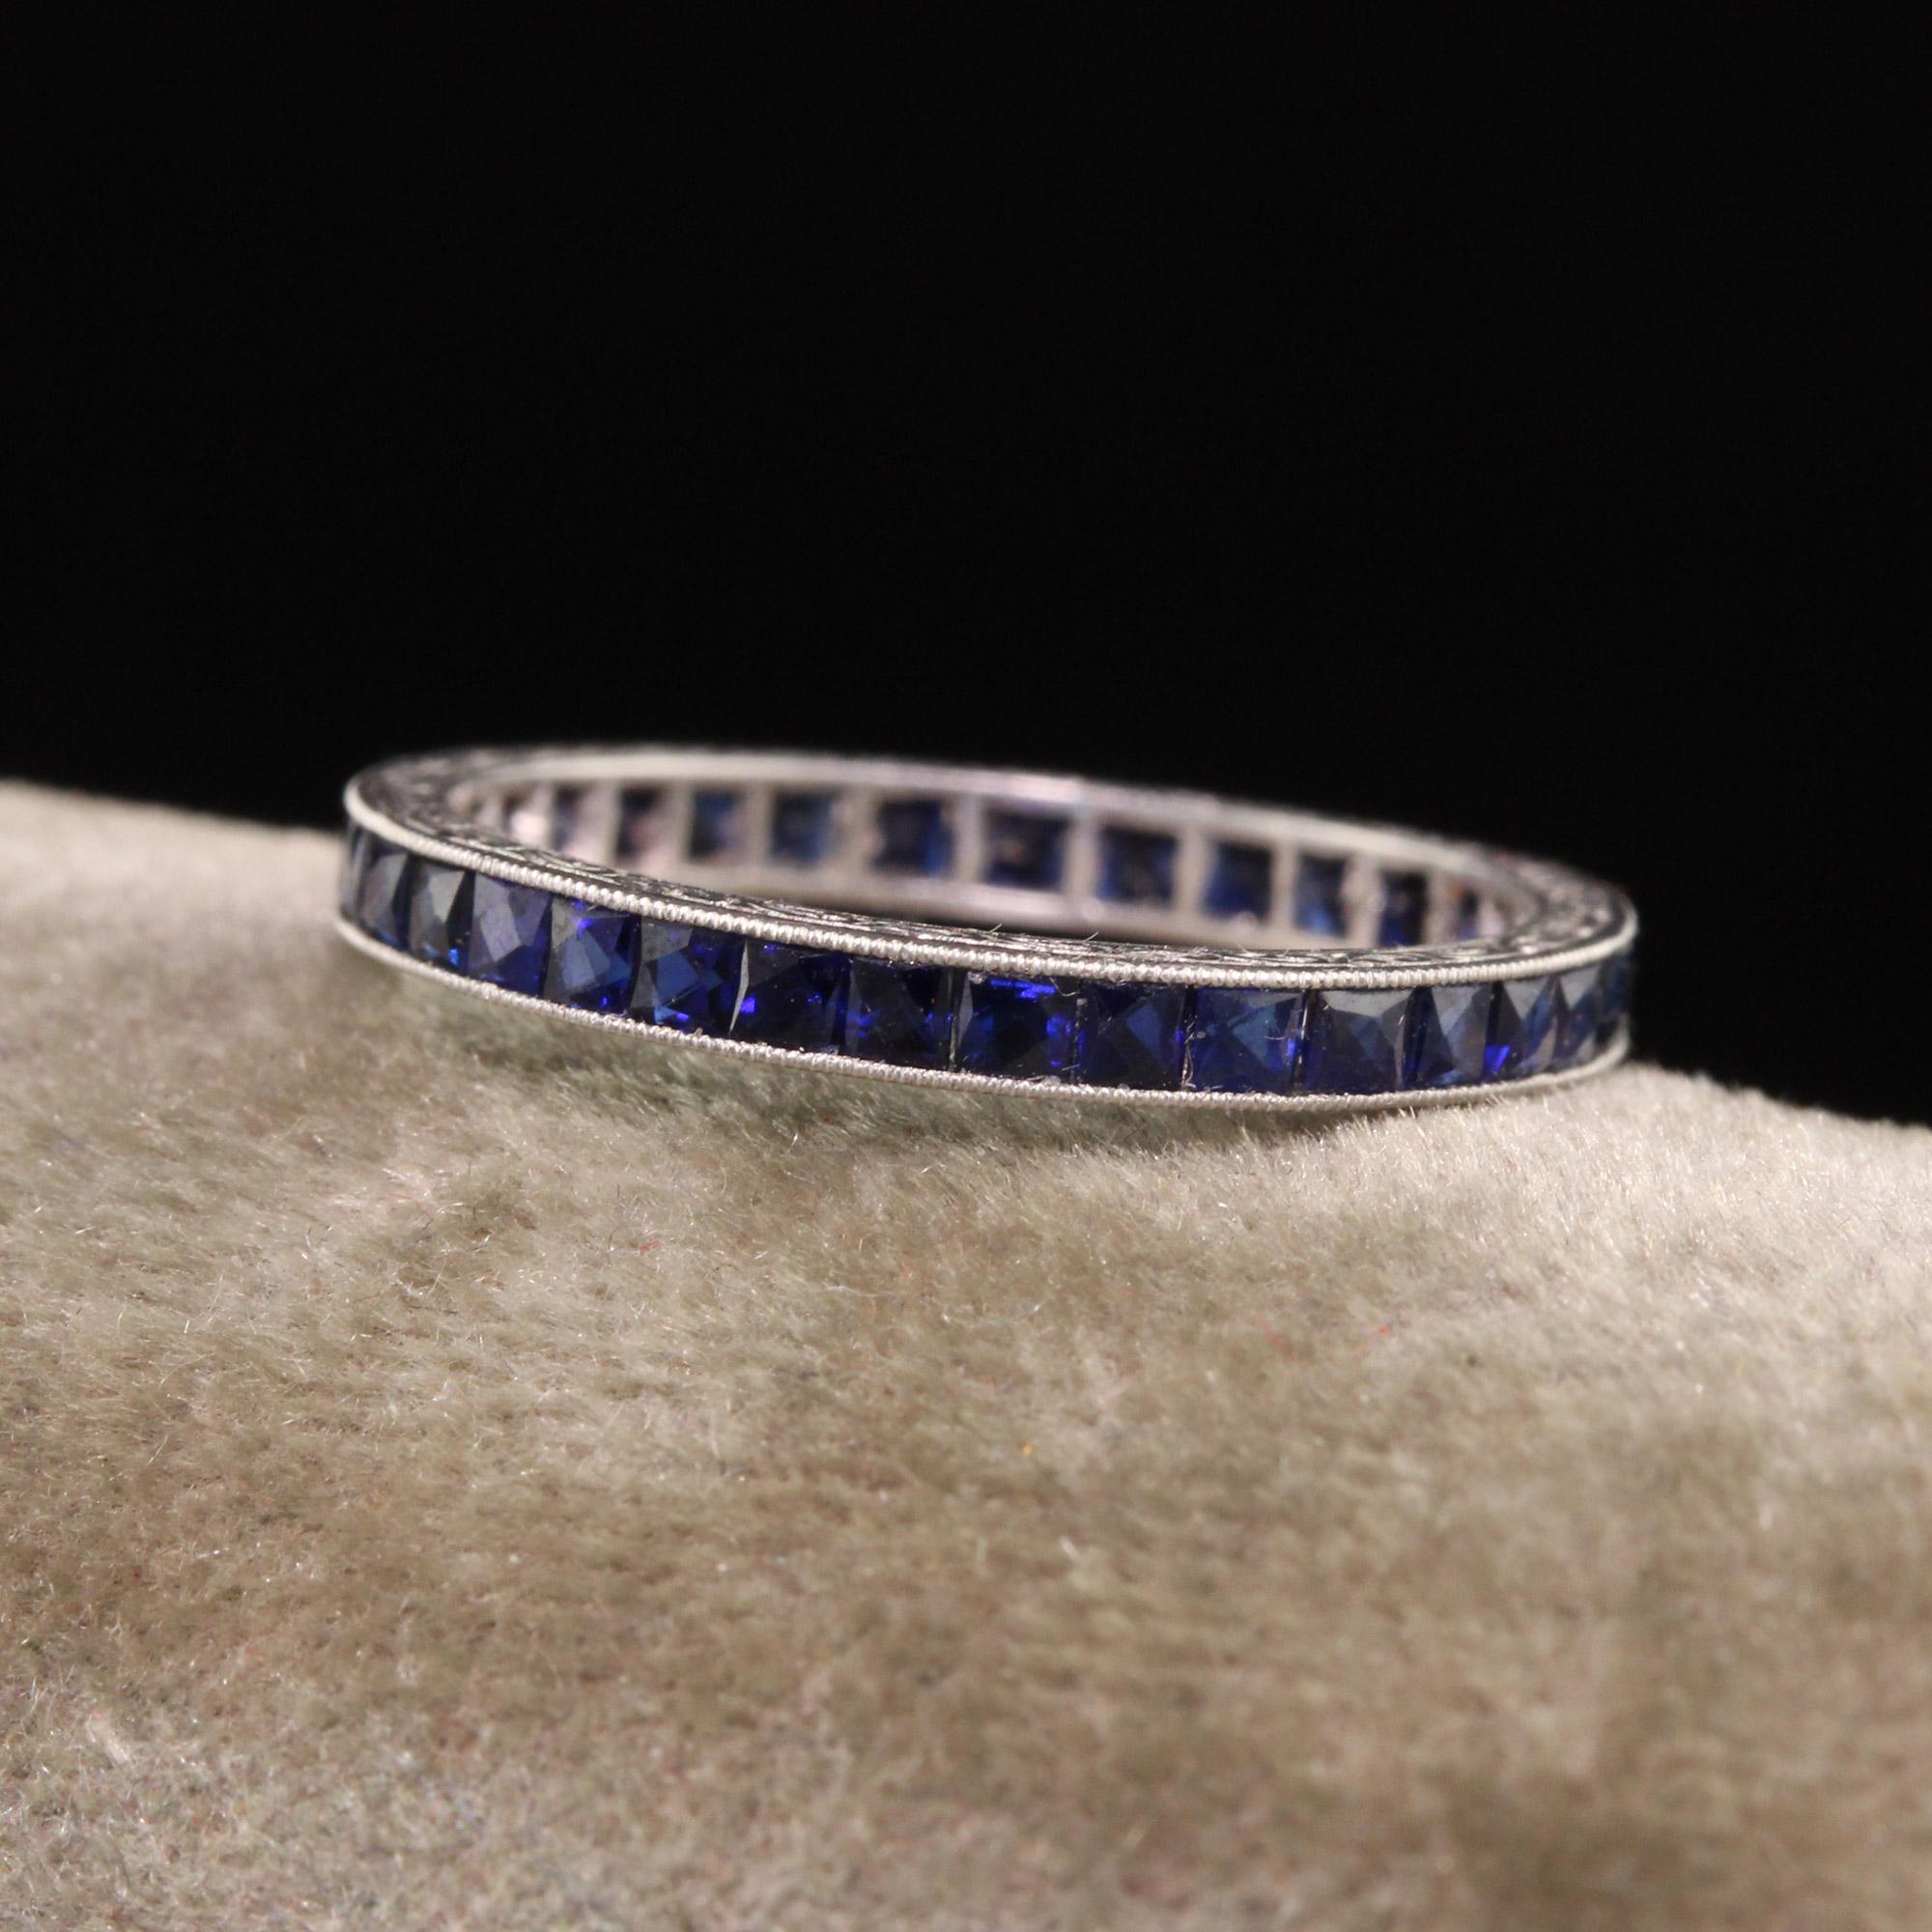 Beautiful Antique Art Deco Platinum French Cut Sapphire Eternity Band. This gorgeous eternity band is crafted in platinum. The ring has French cut sapphires going around the entire ring and is in good condition.

Item #R1280

Metal: